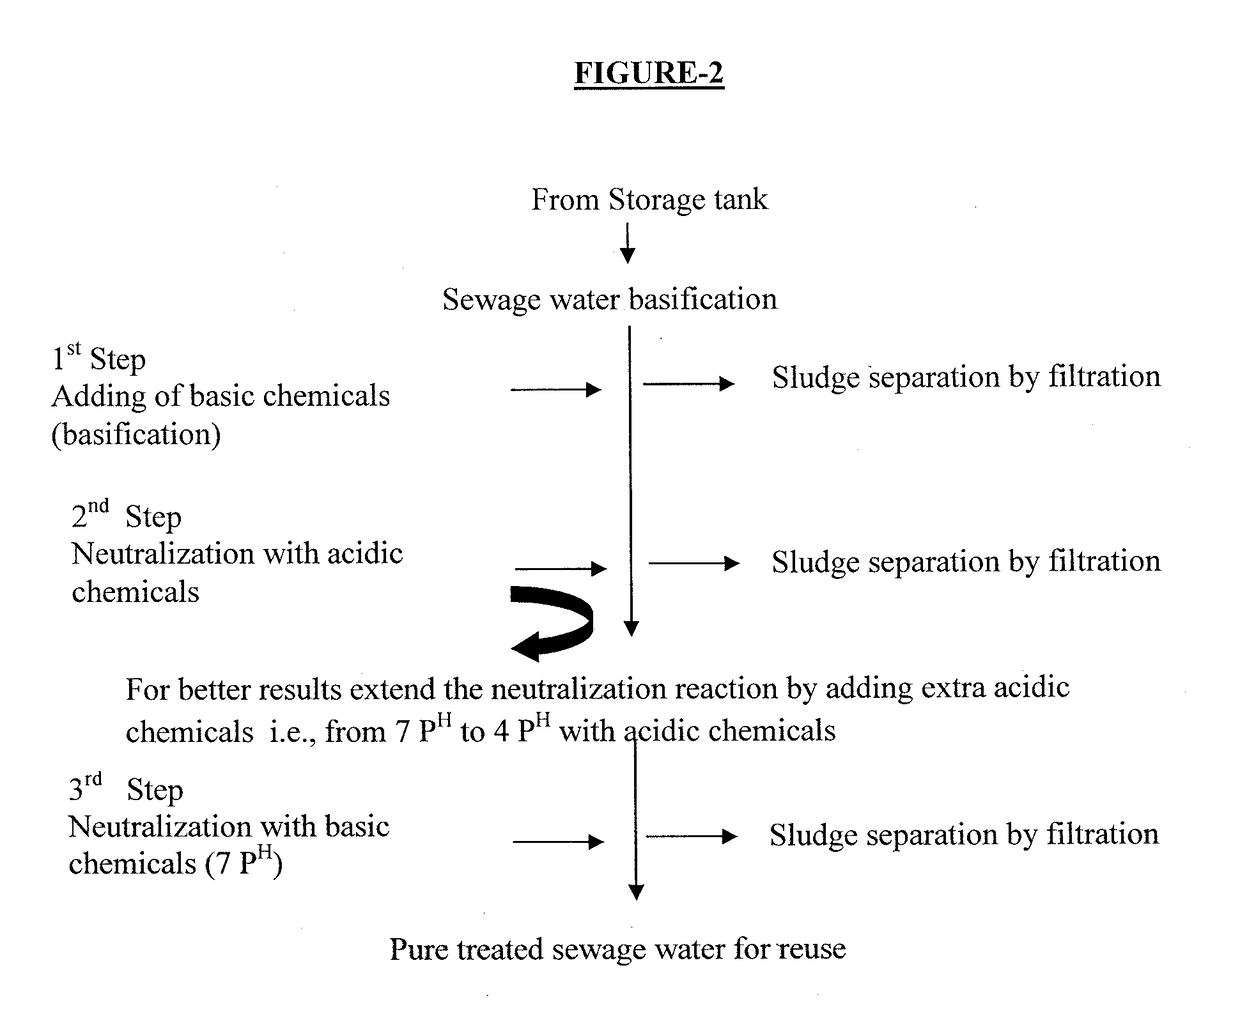 Chemical treatment process of sewage water